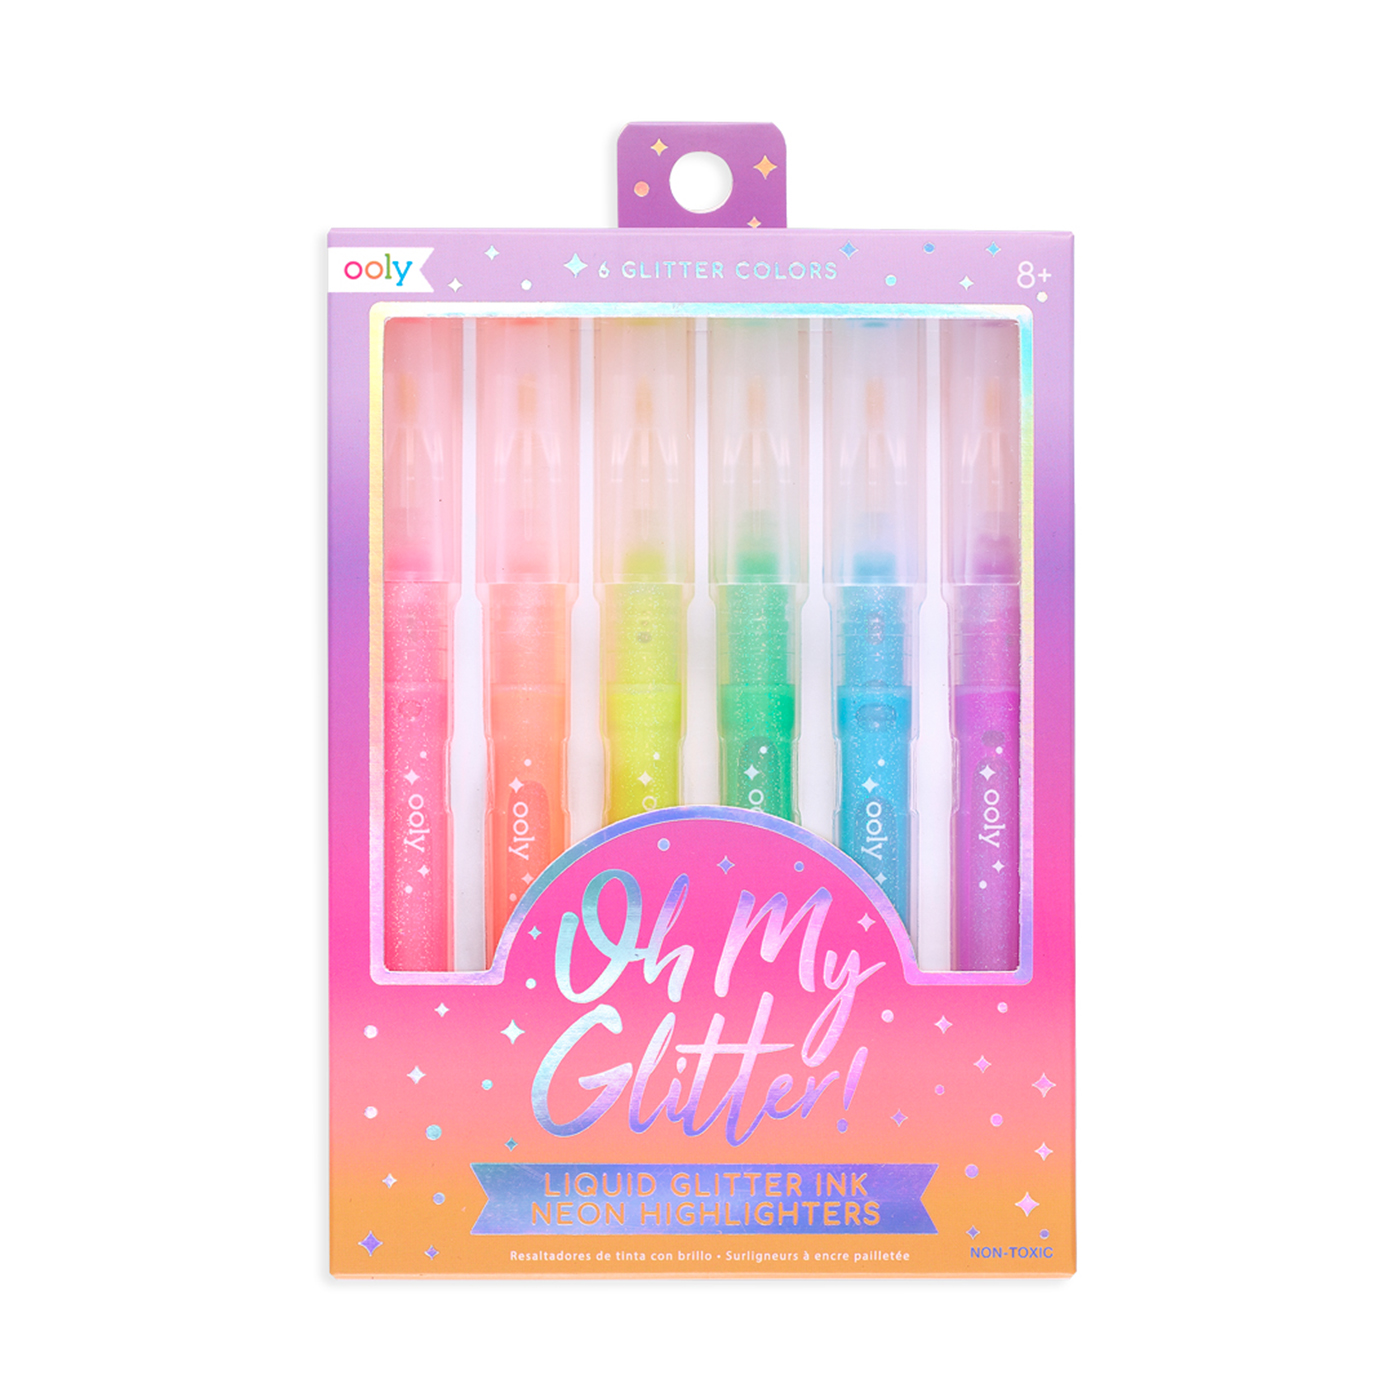  Ooly Oh My Glitter Neon 6’lı Highlighter